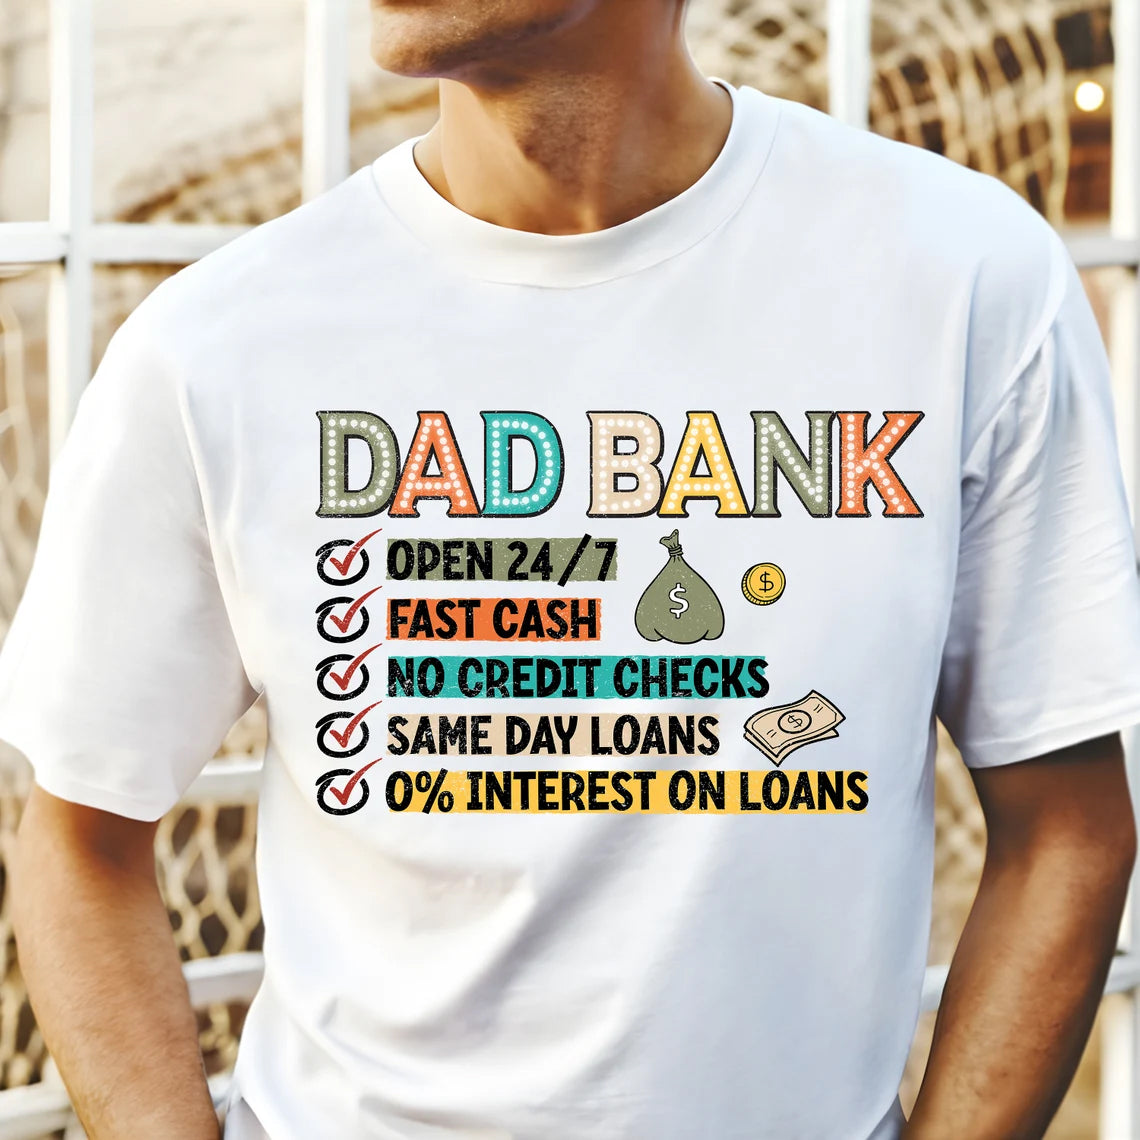 Dad Bank 100% Cotton T-Shirt - Perfect Father's Day Gift